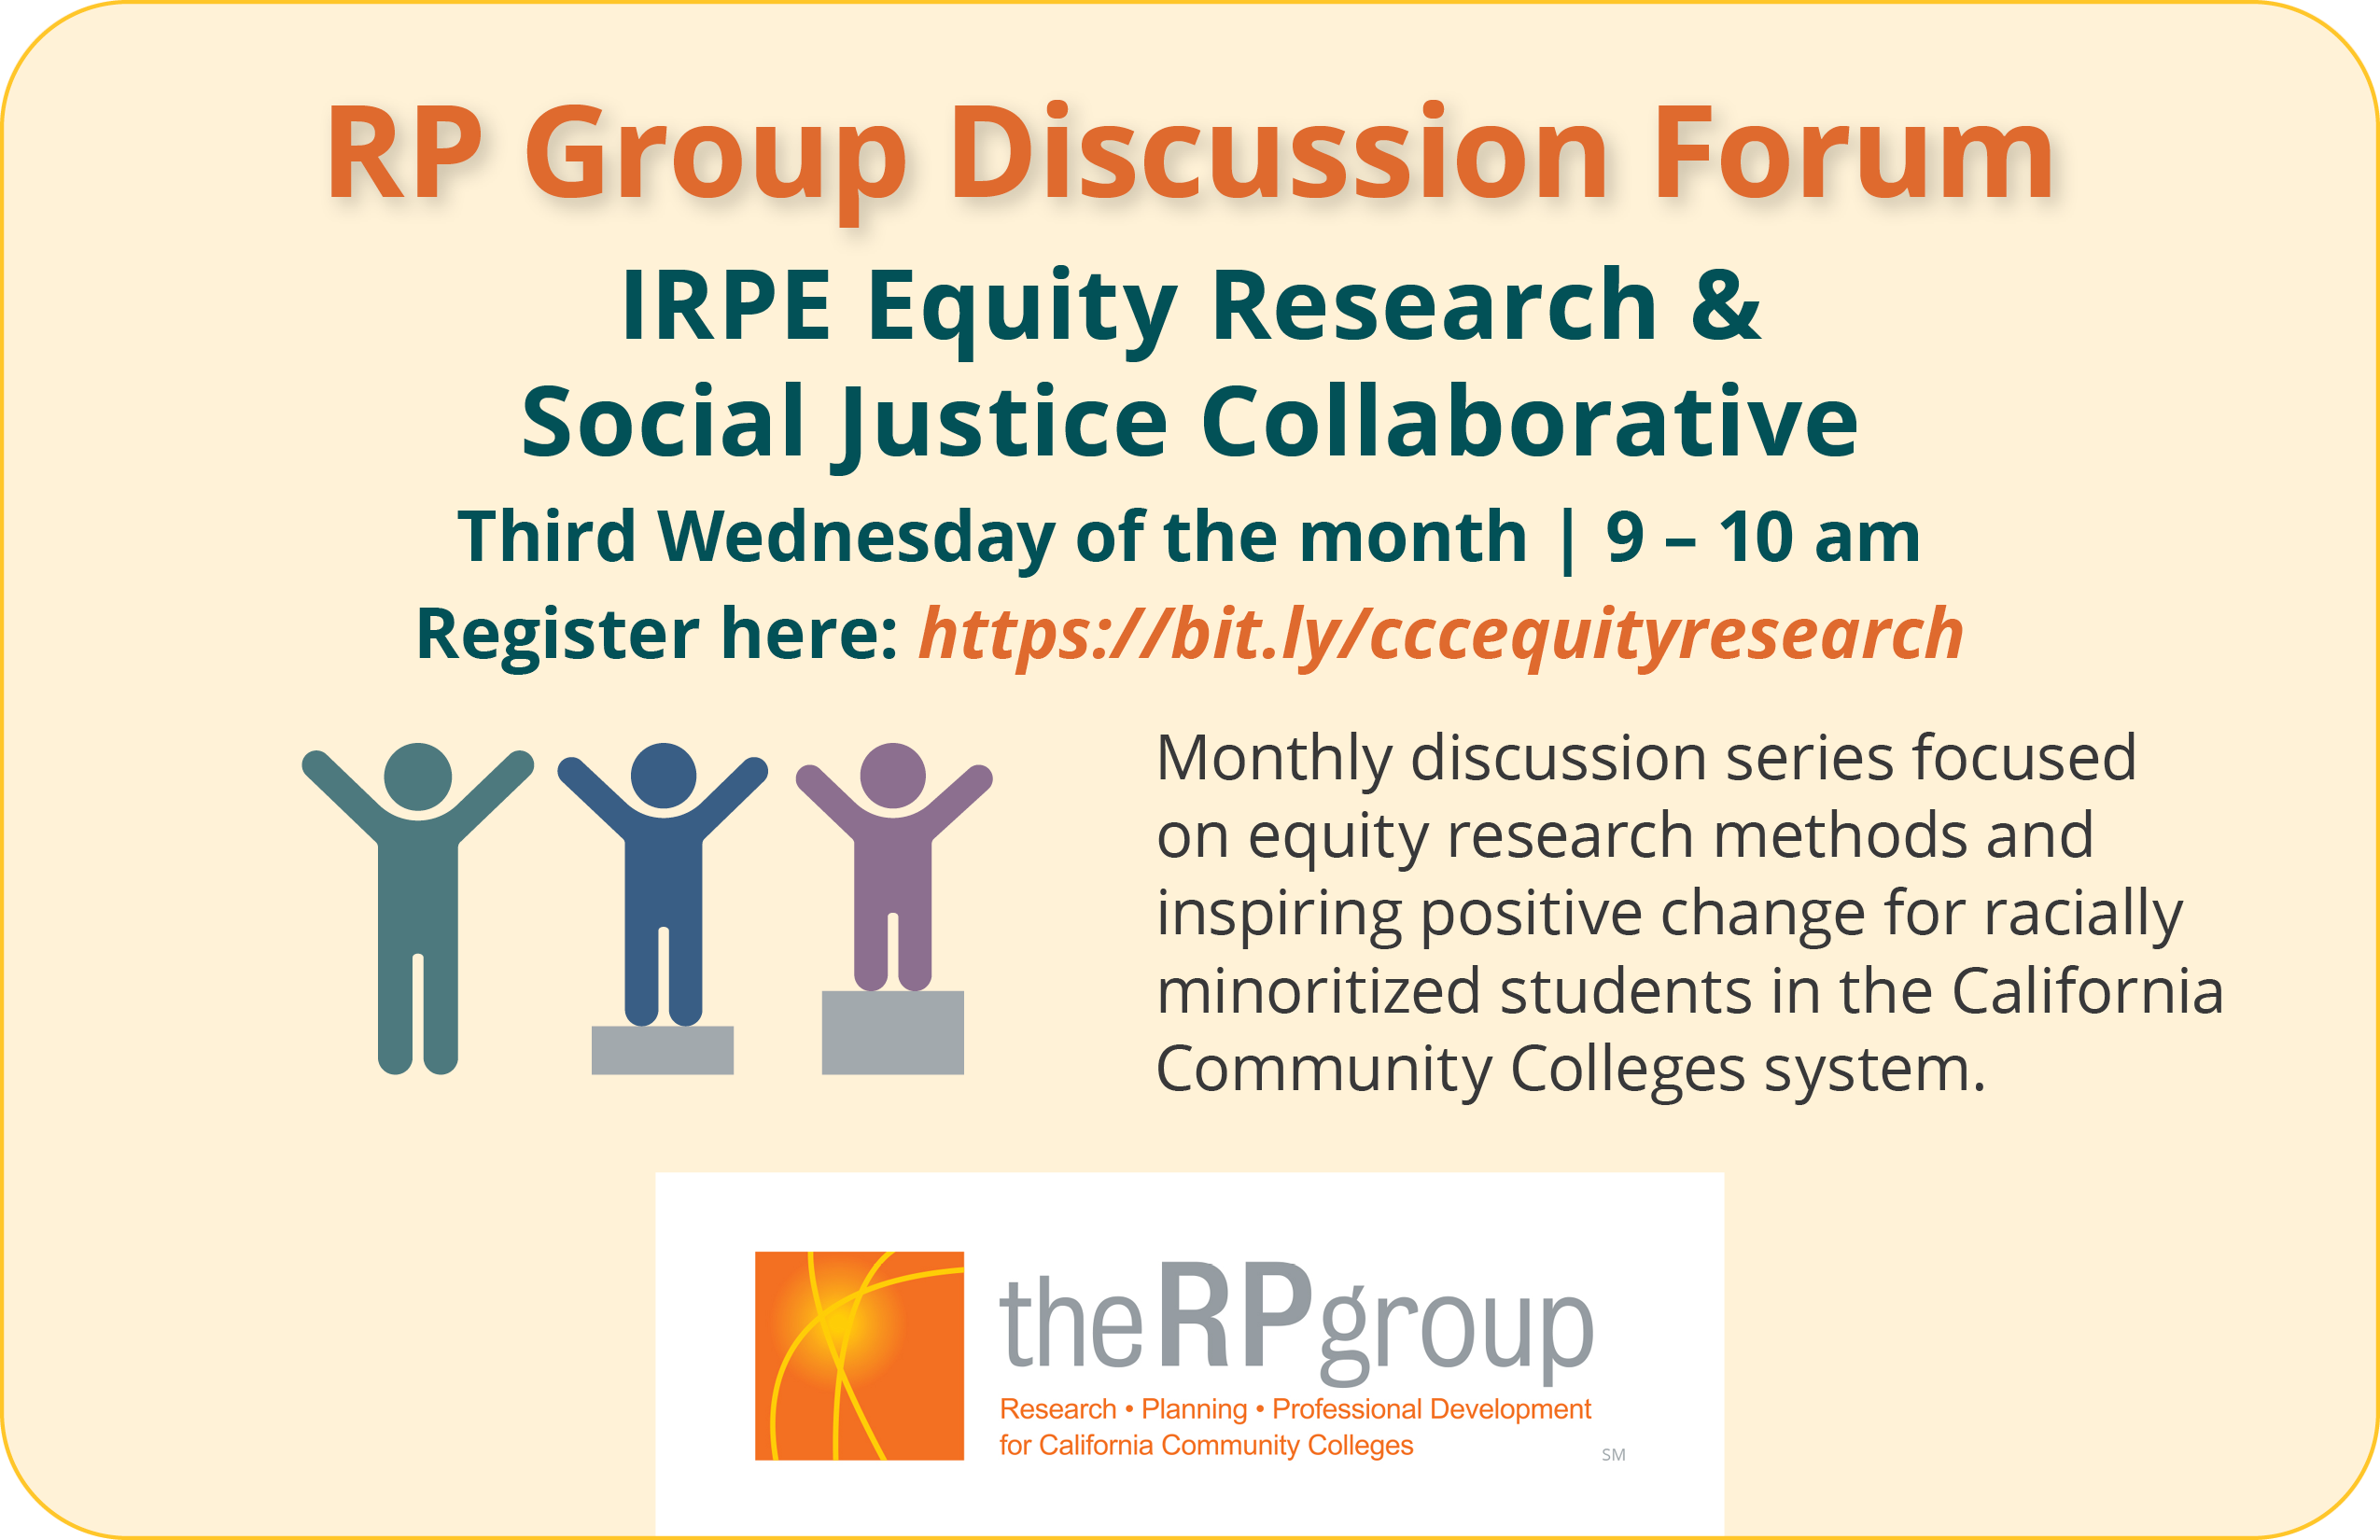 RP Group Discussion Form | IRPE Equity Research and Social Justice Collaborative. Third Wednesday of the month. 9 to 10 am. Monthly discussion series focused on equity research methods and inspiring positive change for racially minoritized students in the California Community Colleges system.